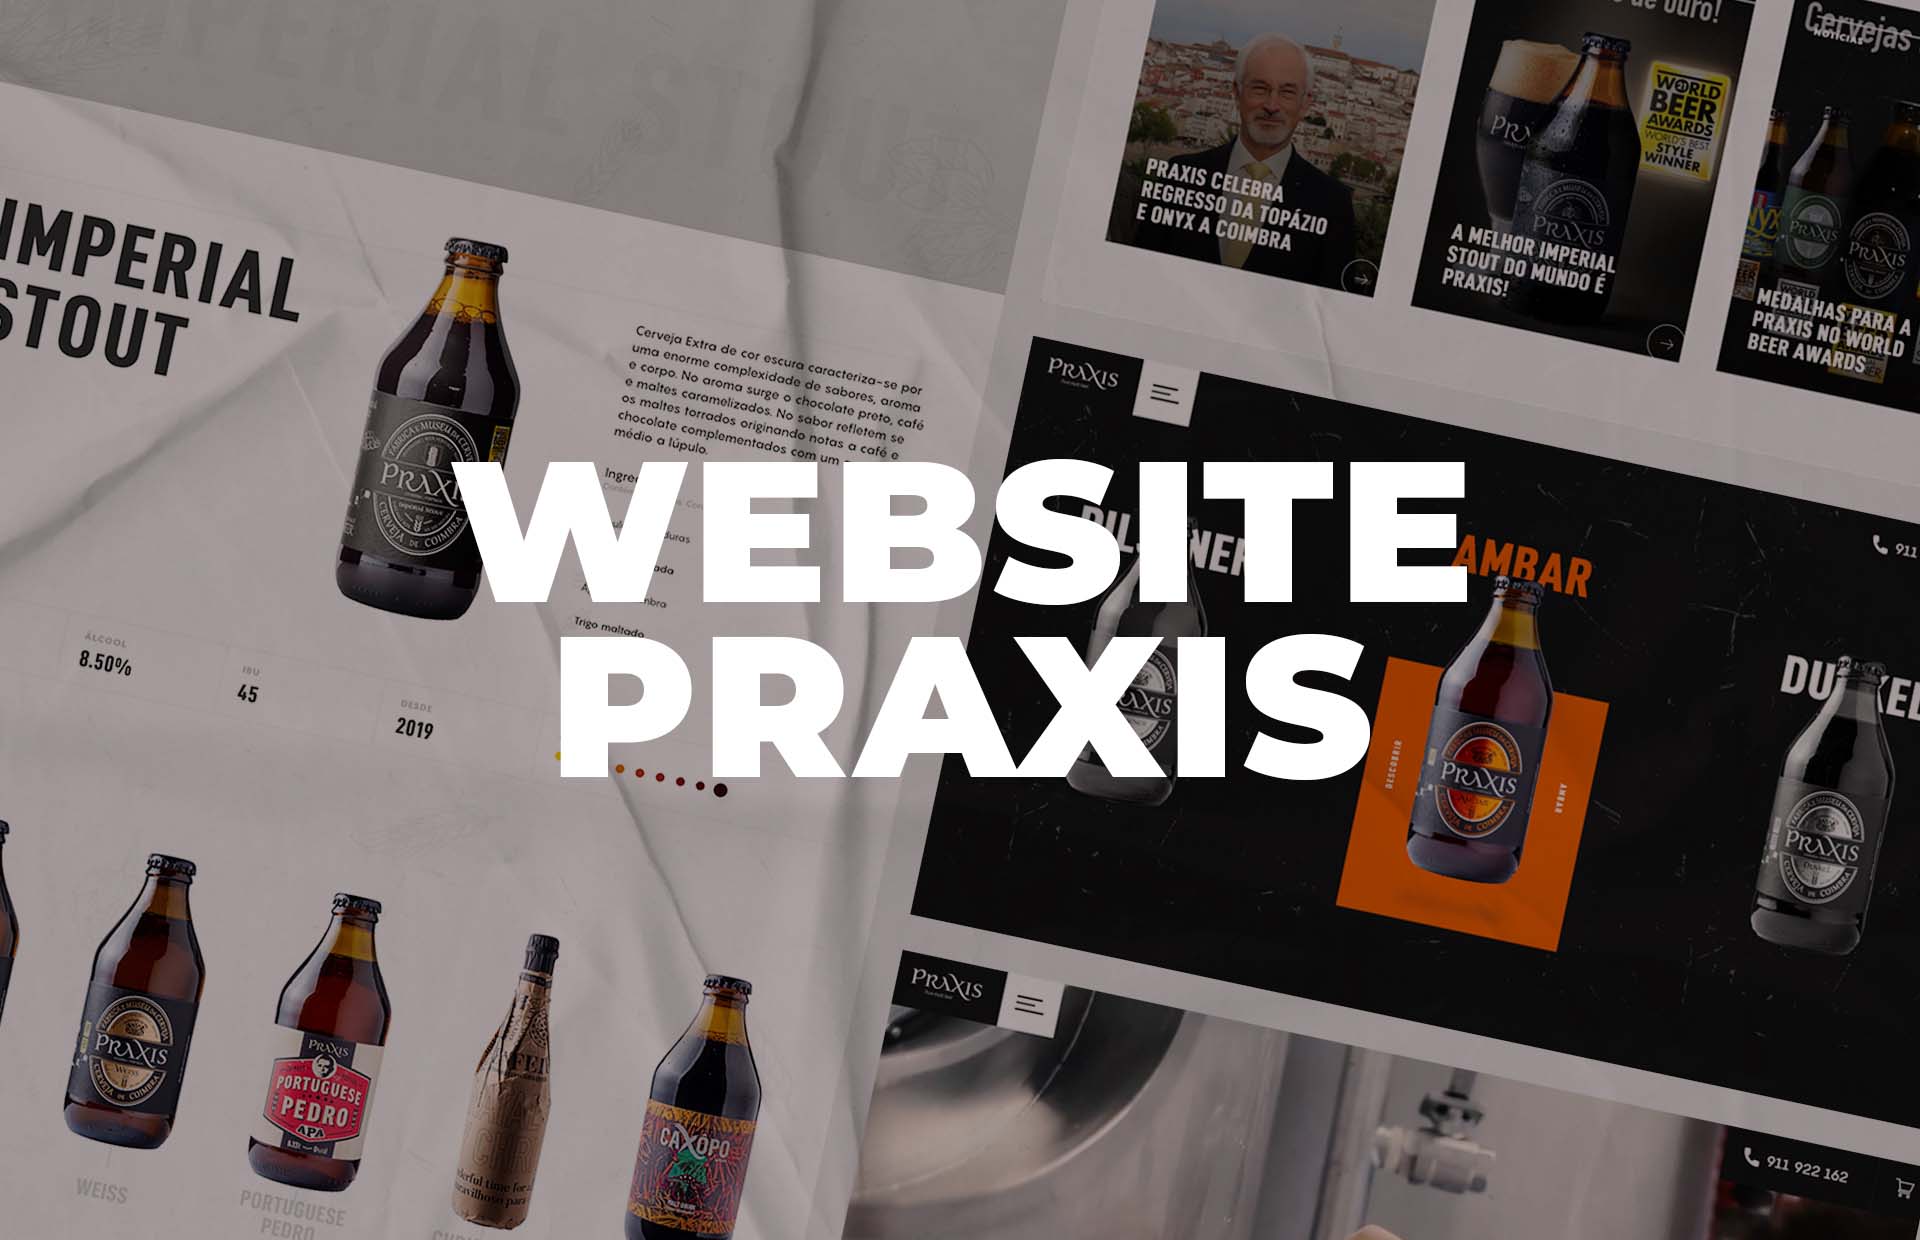 img - 1920x1240 - project - website praxis